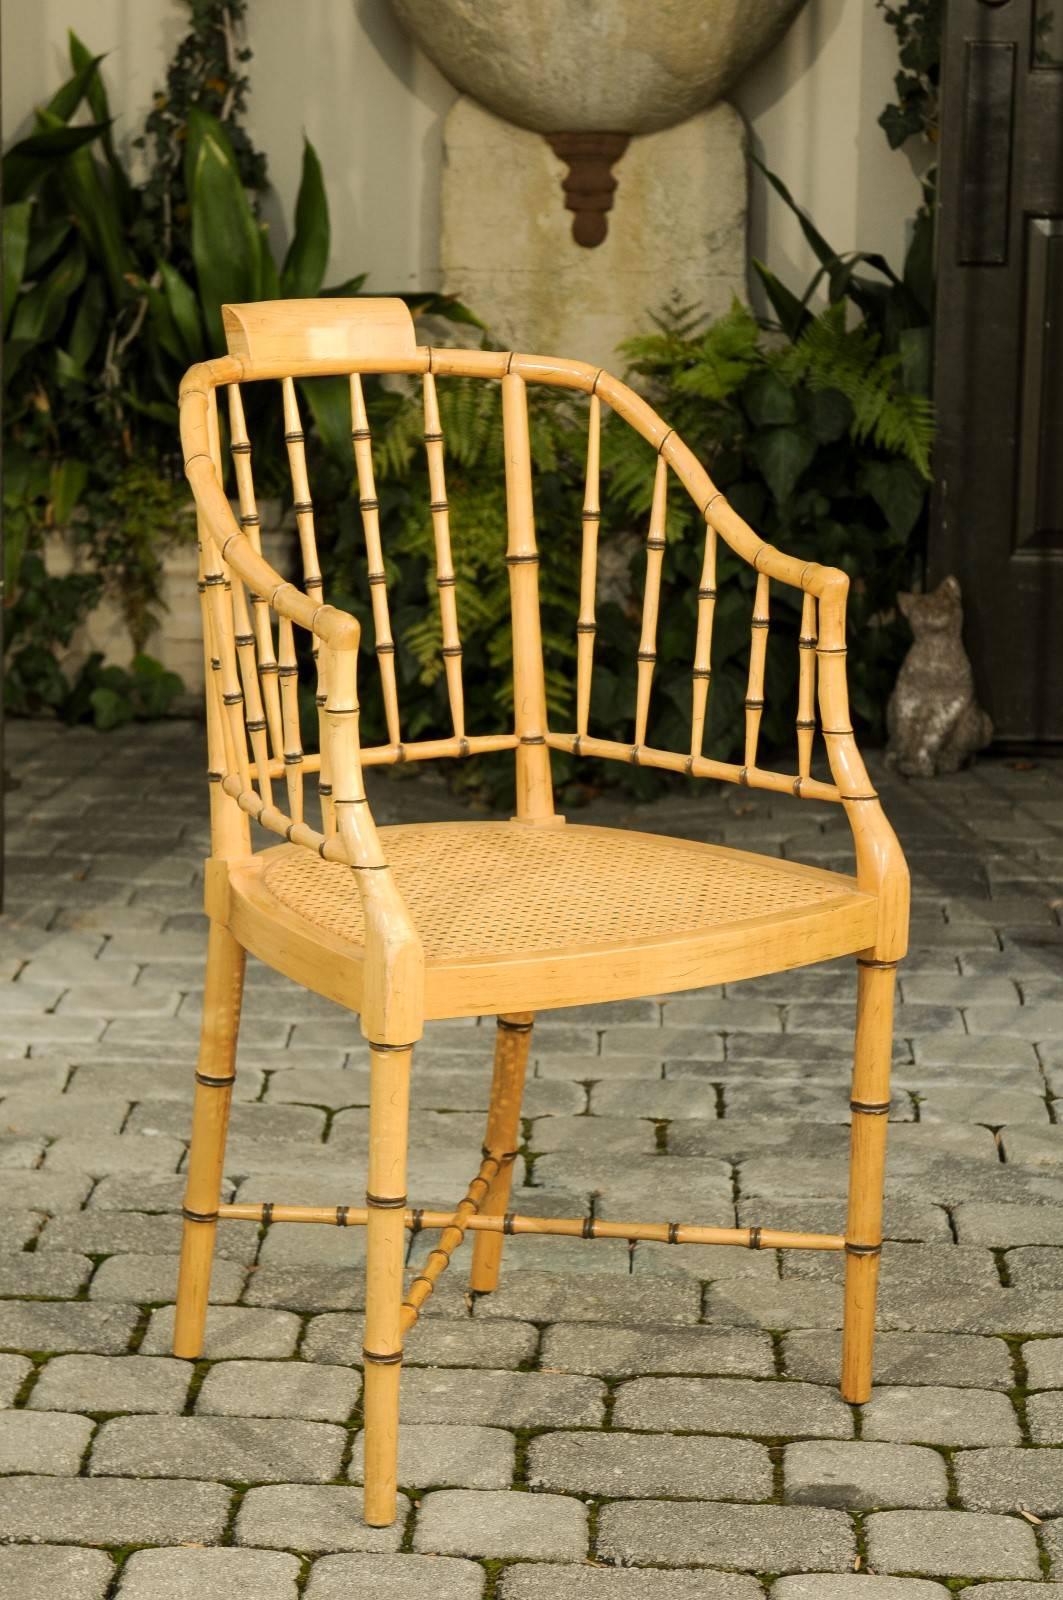 A vintage Mid-Century Modern faux-bamboo tub armchair from furniture maker Baker with cane seat. Made of faux-bamboo, this American Baker chair, circa 1960 features a tub shaped back and curved arms resting on a cane seat. The chair is raised on